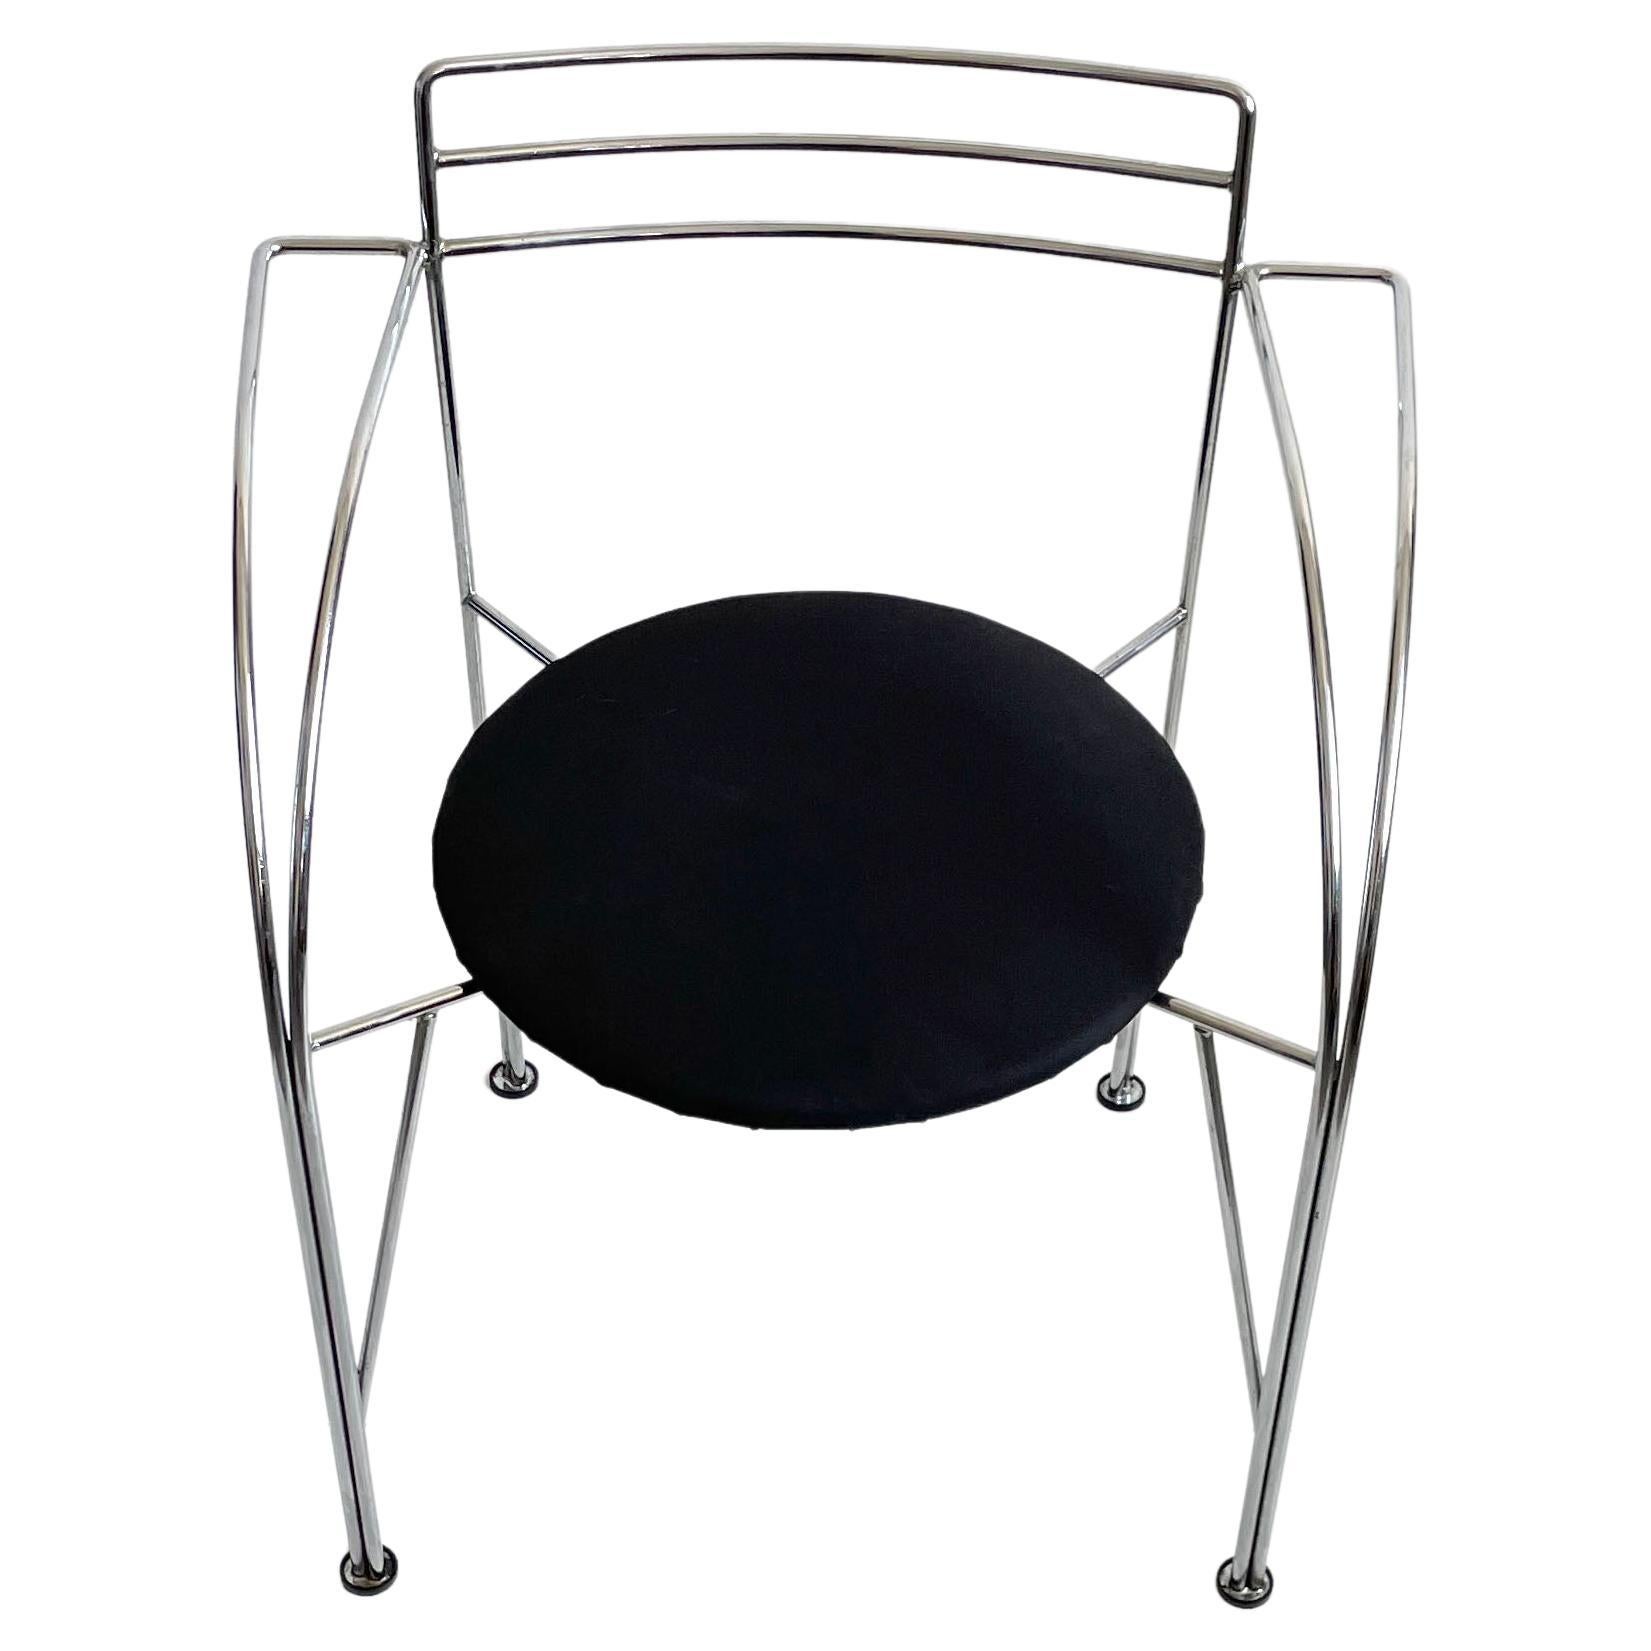 Postmodern dining chair 'Lune d'Argent' (Silver Moon) by Pascal Mourgue

6 chairs available

The chair was designed in 1985 and produced by Feomob in France

The chair features a very sturdy minimalist chromed steel frame and a round seat